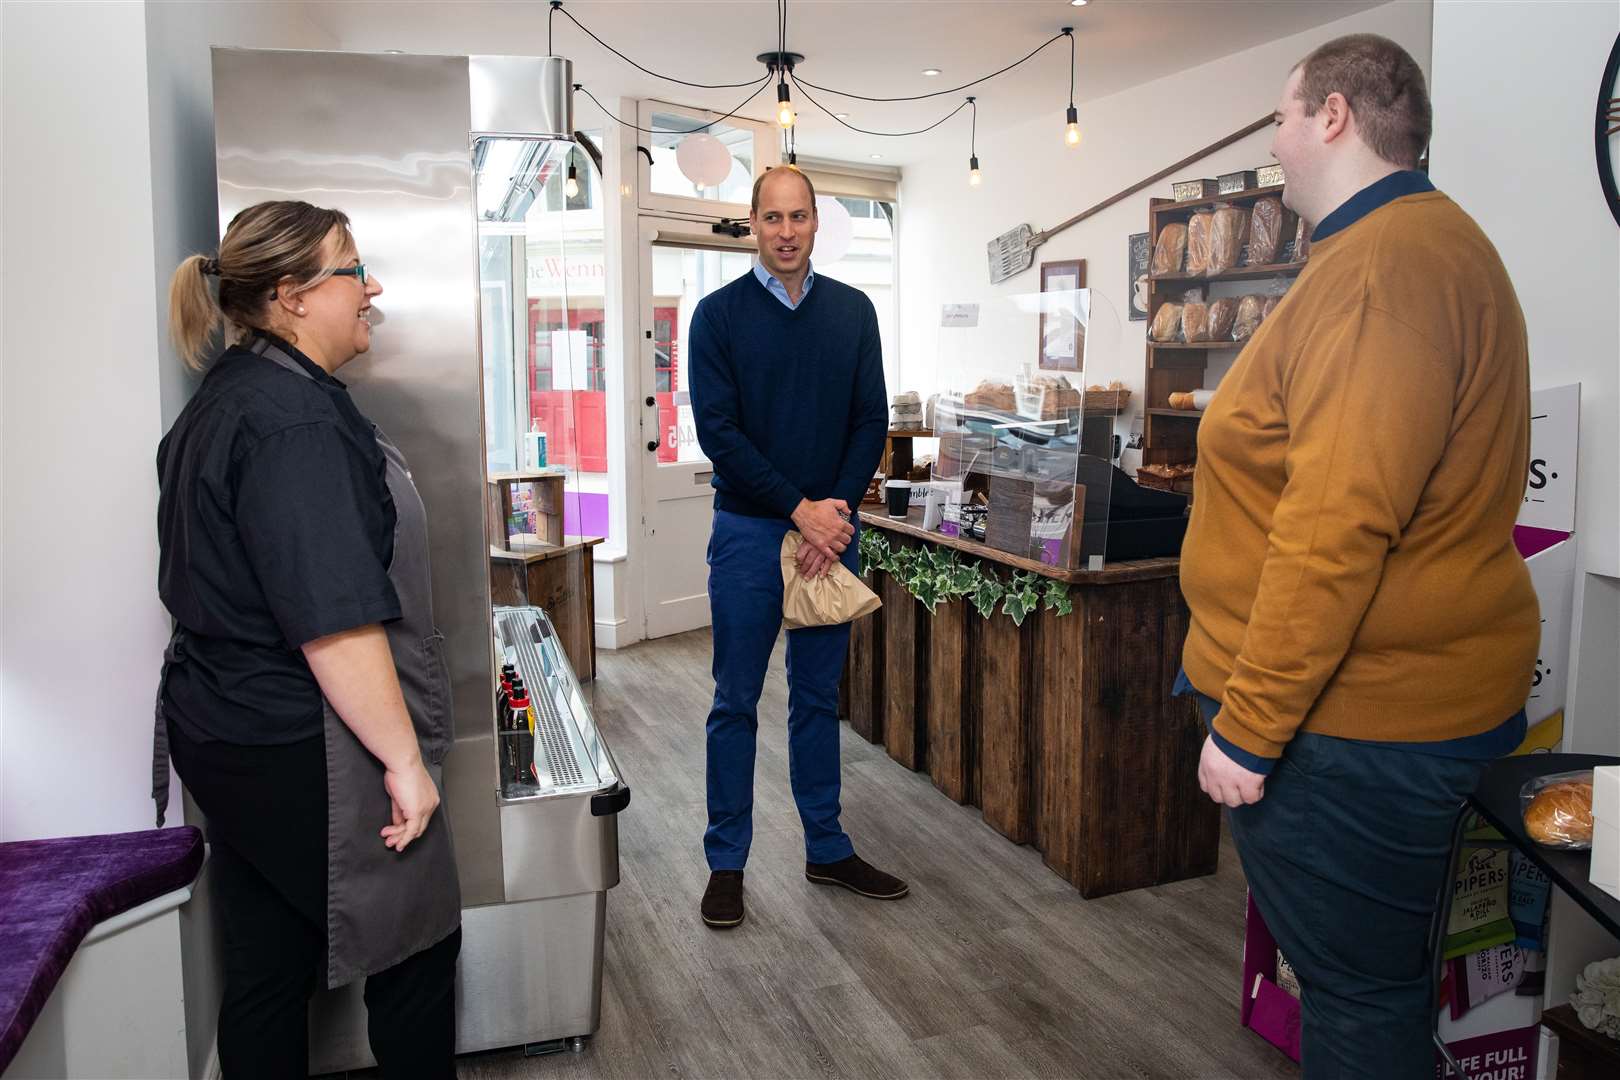 The Duke of Cambridge speaks to shop staff Sarah Easthall and Ted Bartram at Smiths Bakery (Aaron Chown/PA)